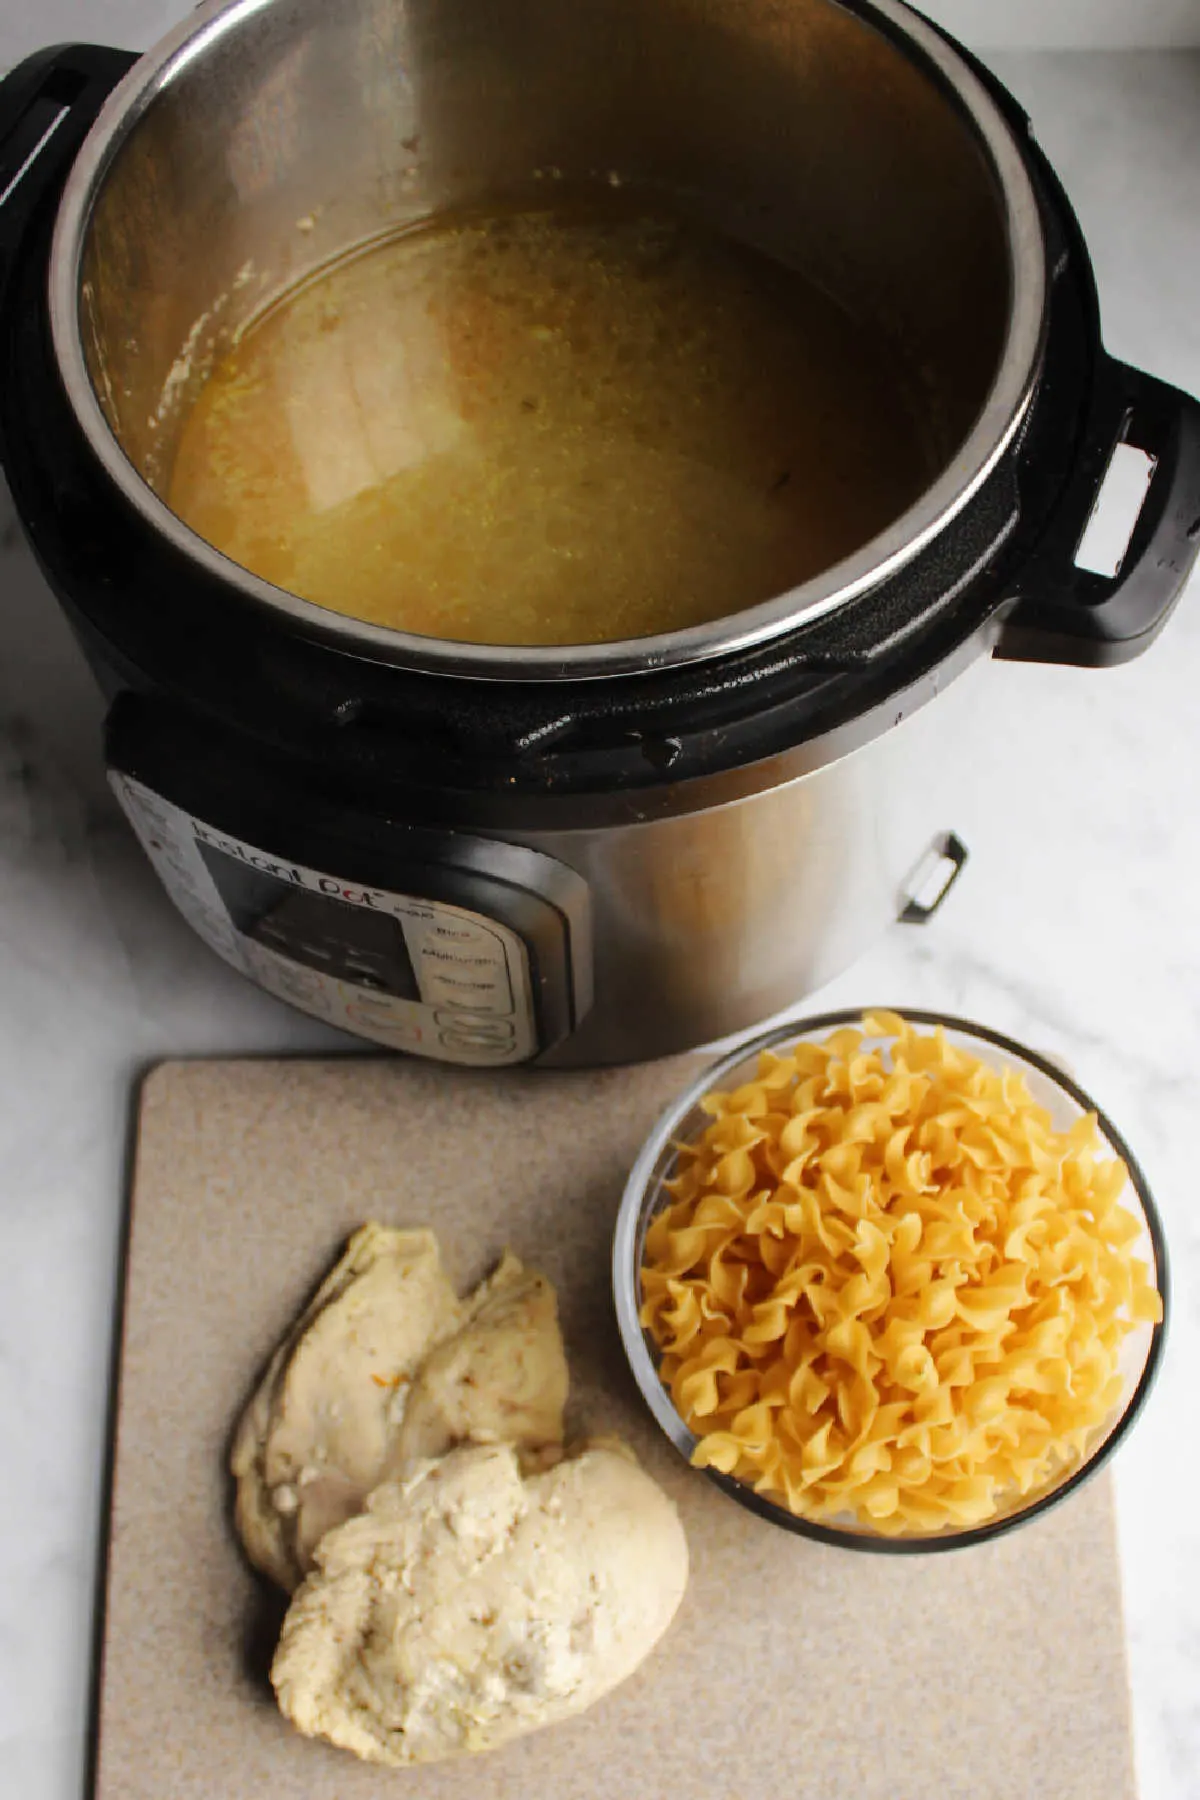 Cooked chicken on cutting board with bowl of raw pasta next to instant pot of broth waiting for pasta.